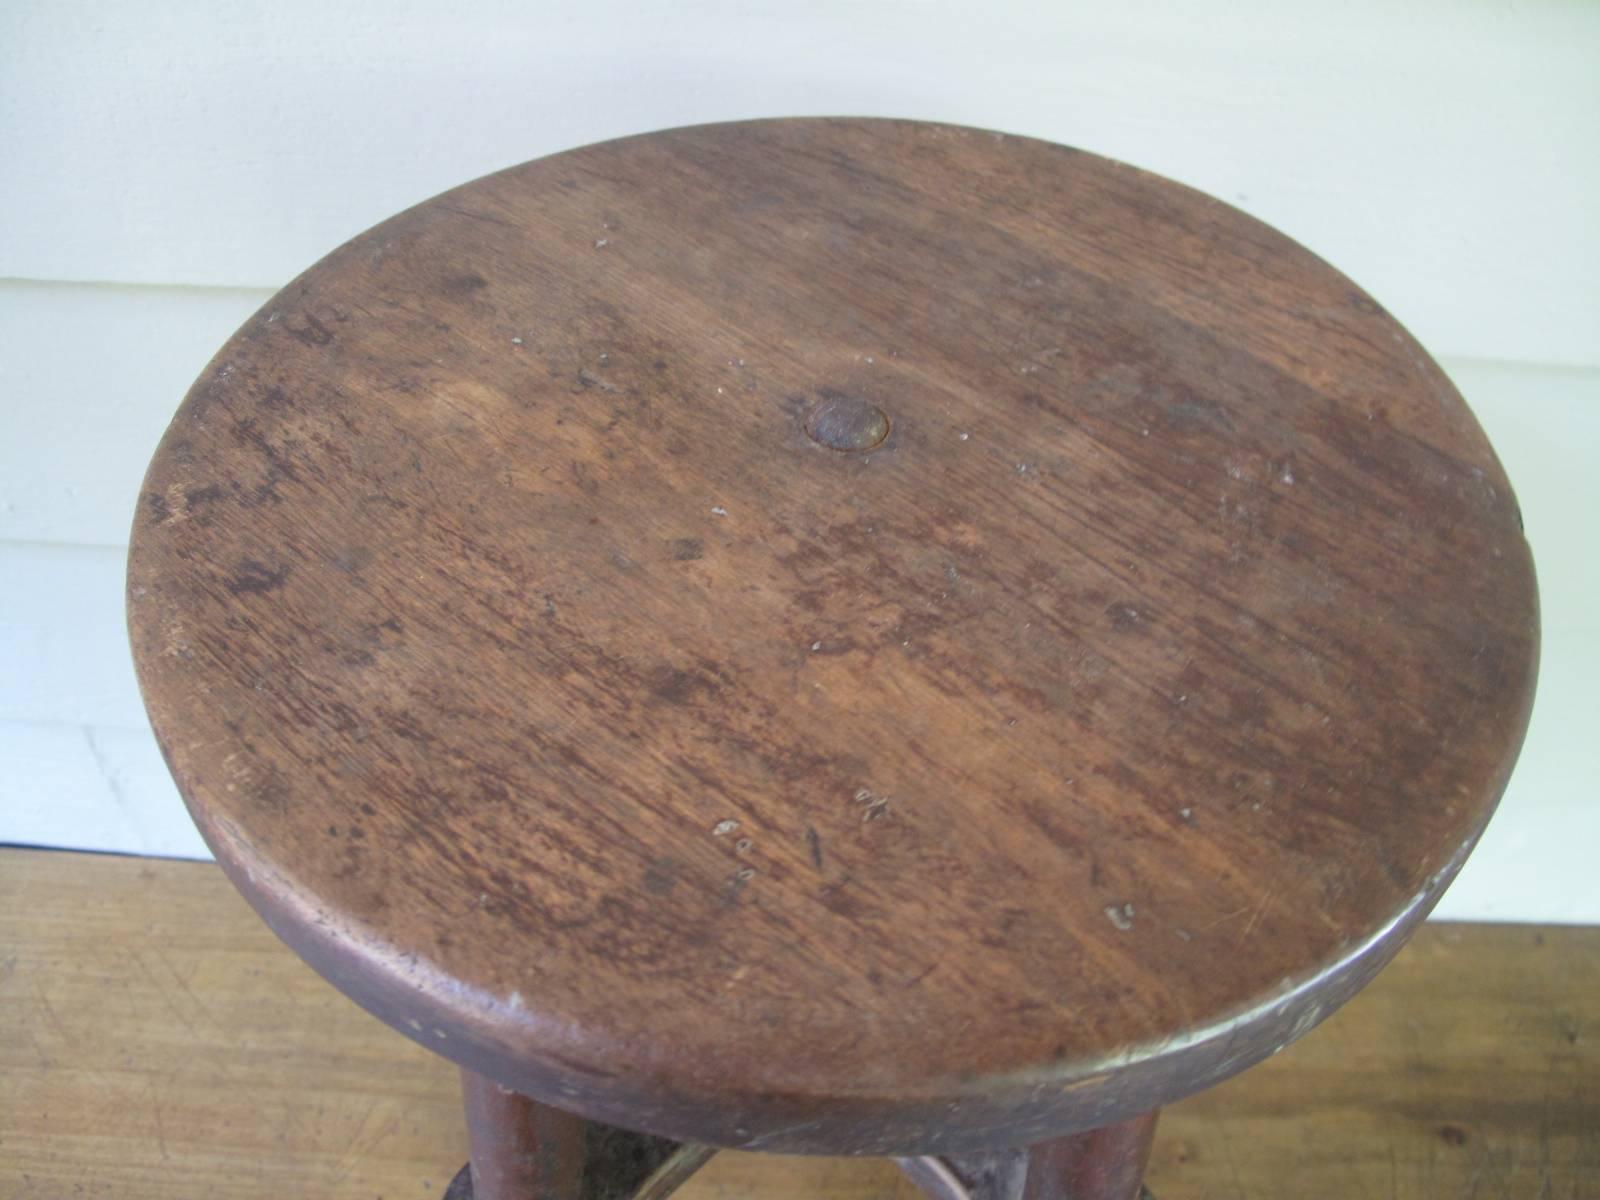 1900s American stool. Unique form. Legs are supported by a wood cross brace and a single metal rod.